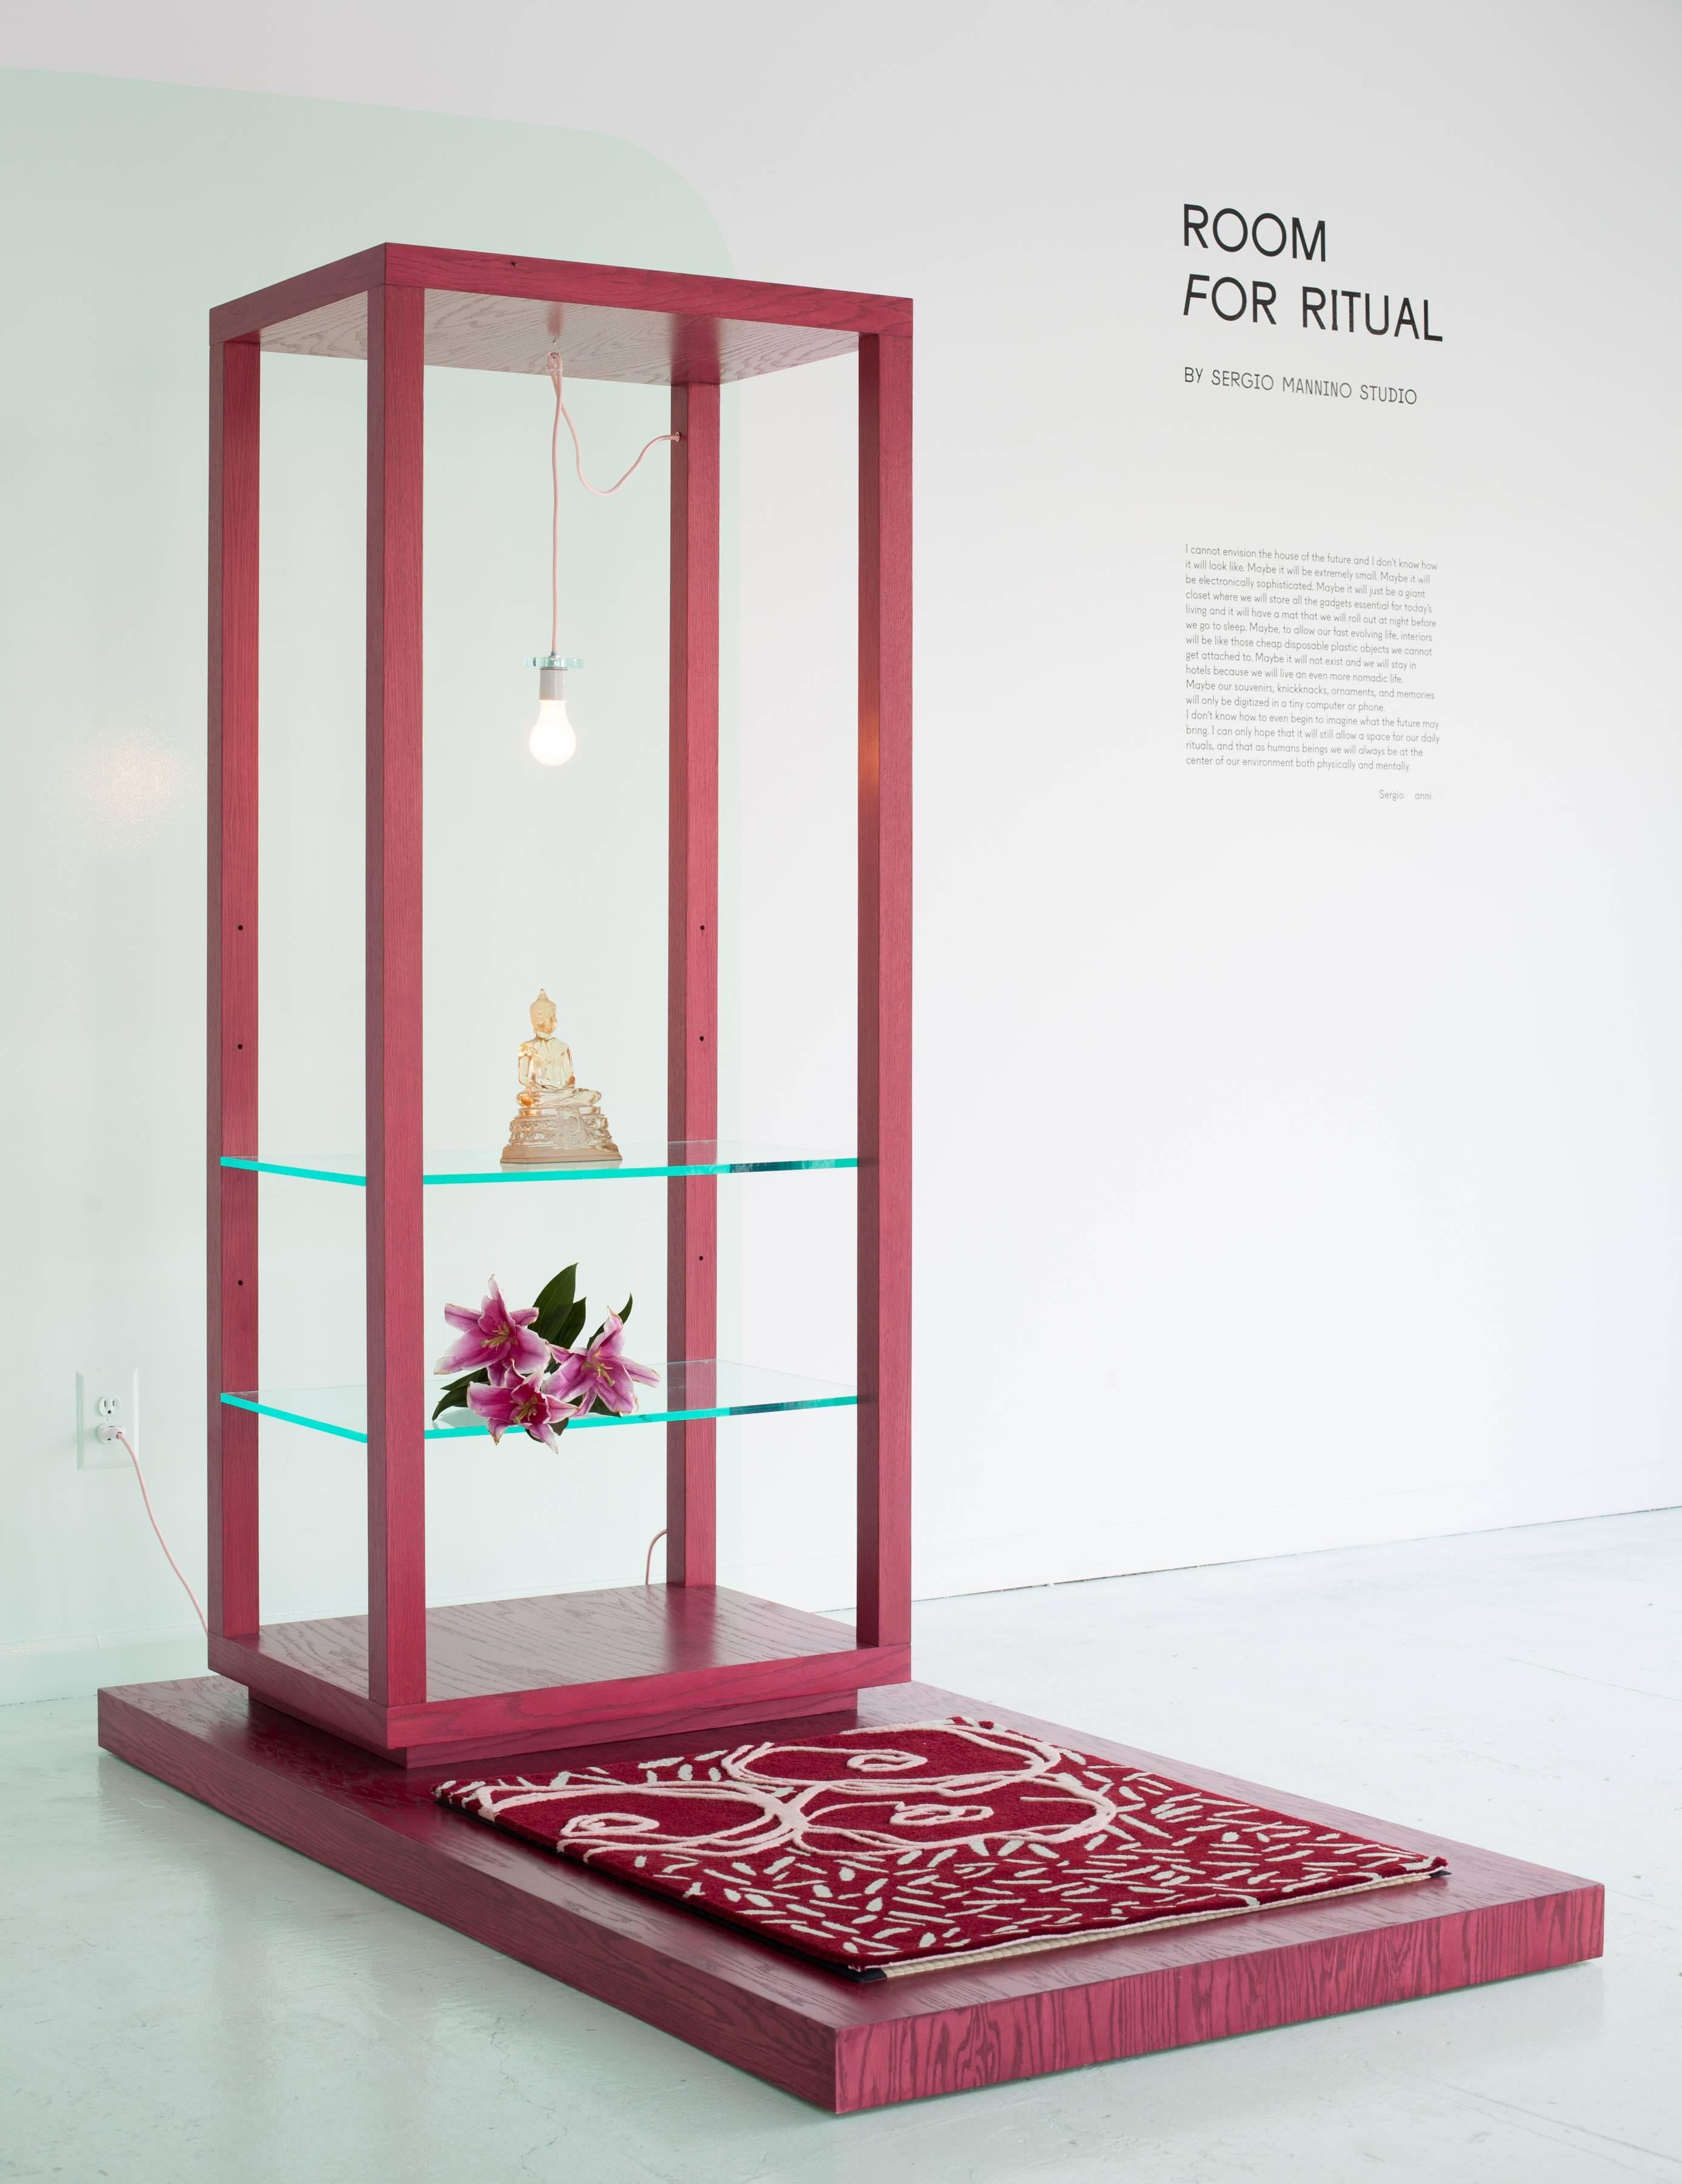 Room for Ritual (or Cento Storie #67) is a meditation altar designed by Sergio Mannino for his Cento Storie solo exhibition at the Memphis Postdesign Gallery in Milan in 2002, curated by Ettore Sottsass. The piece was originally presented only in